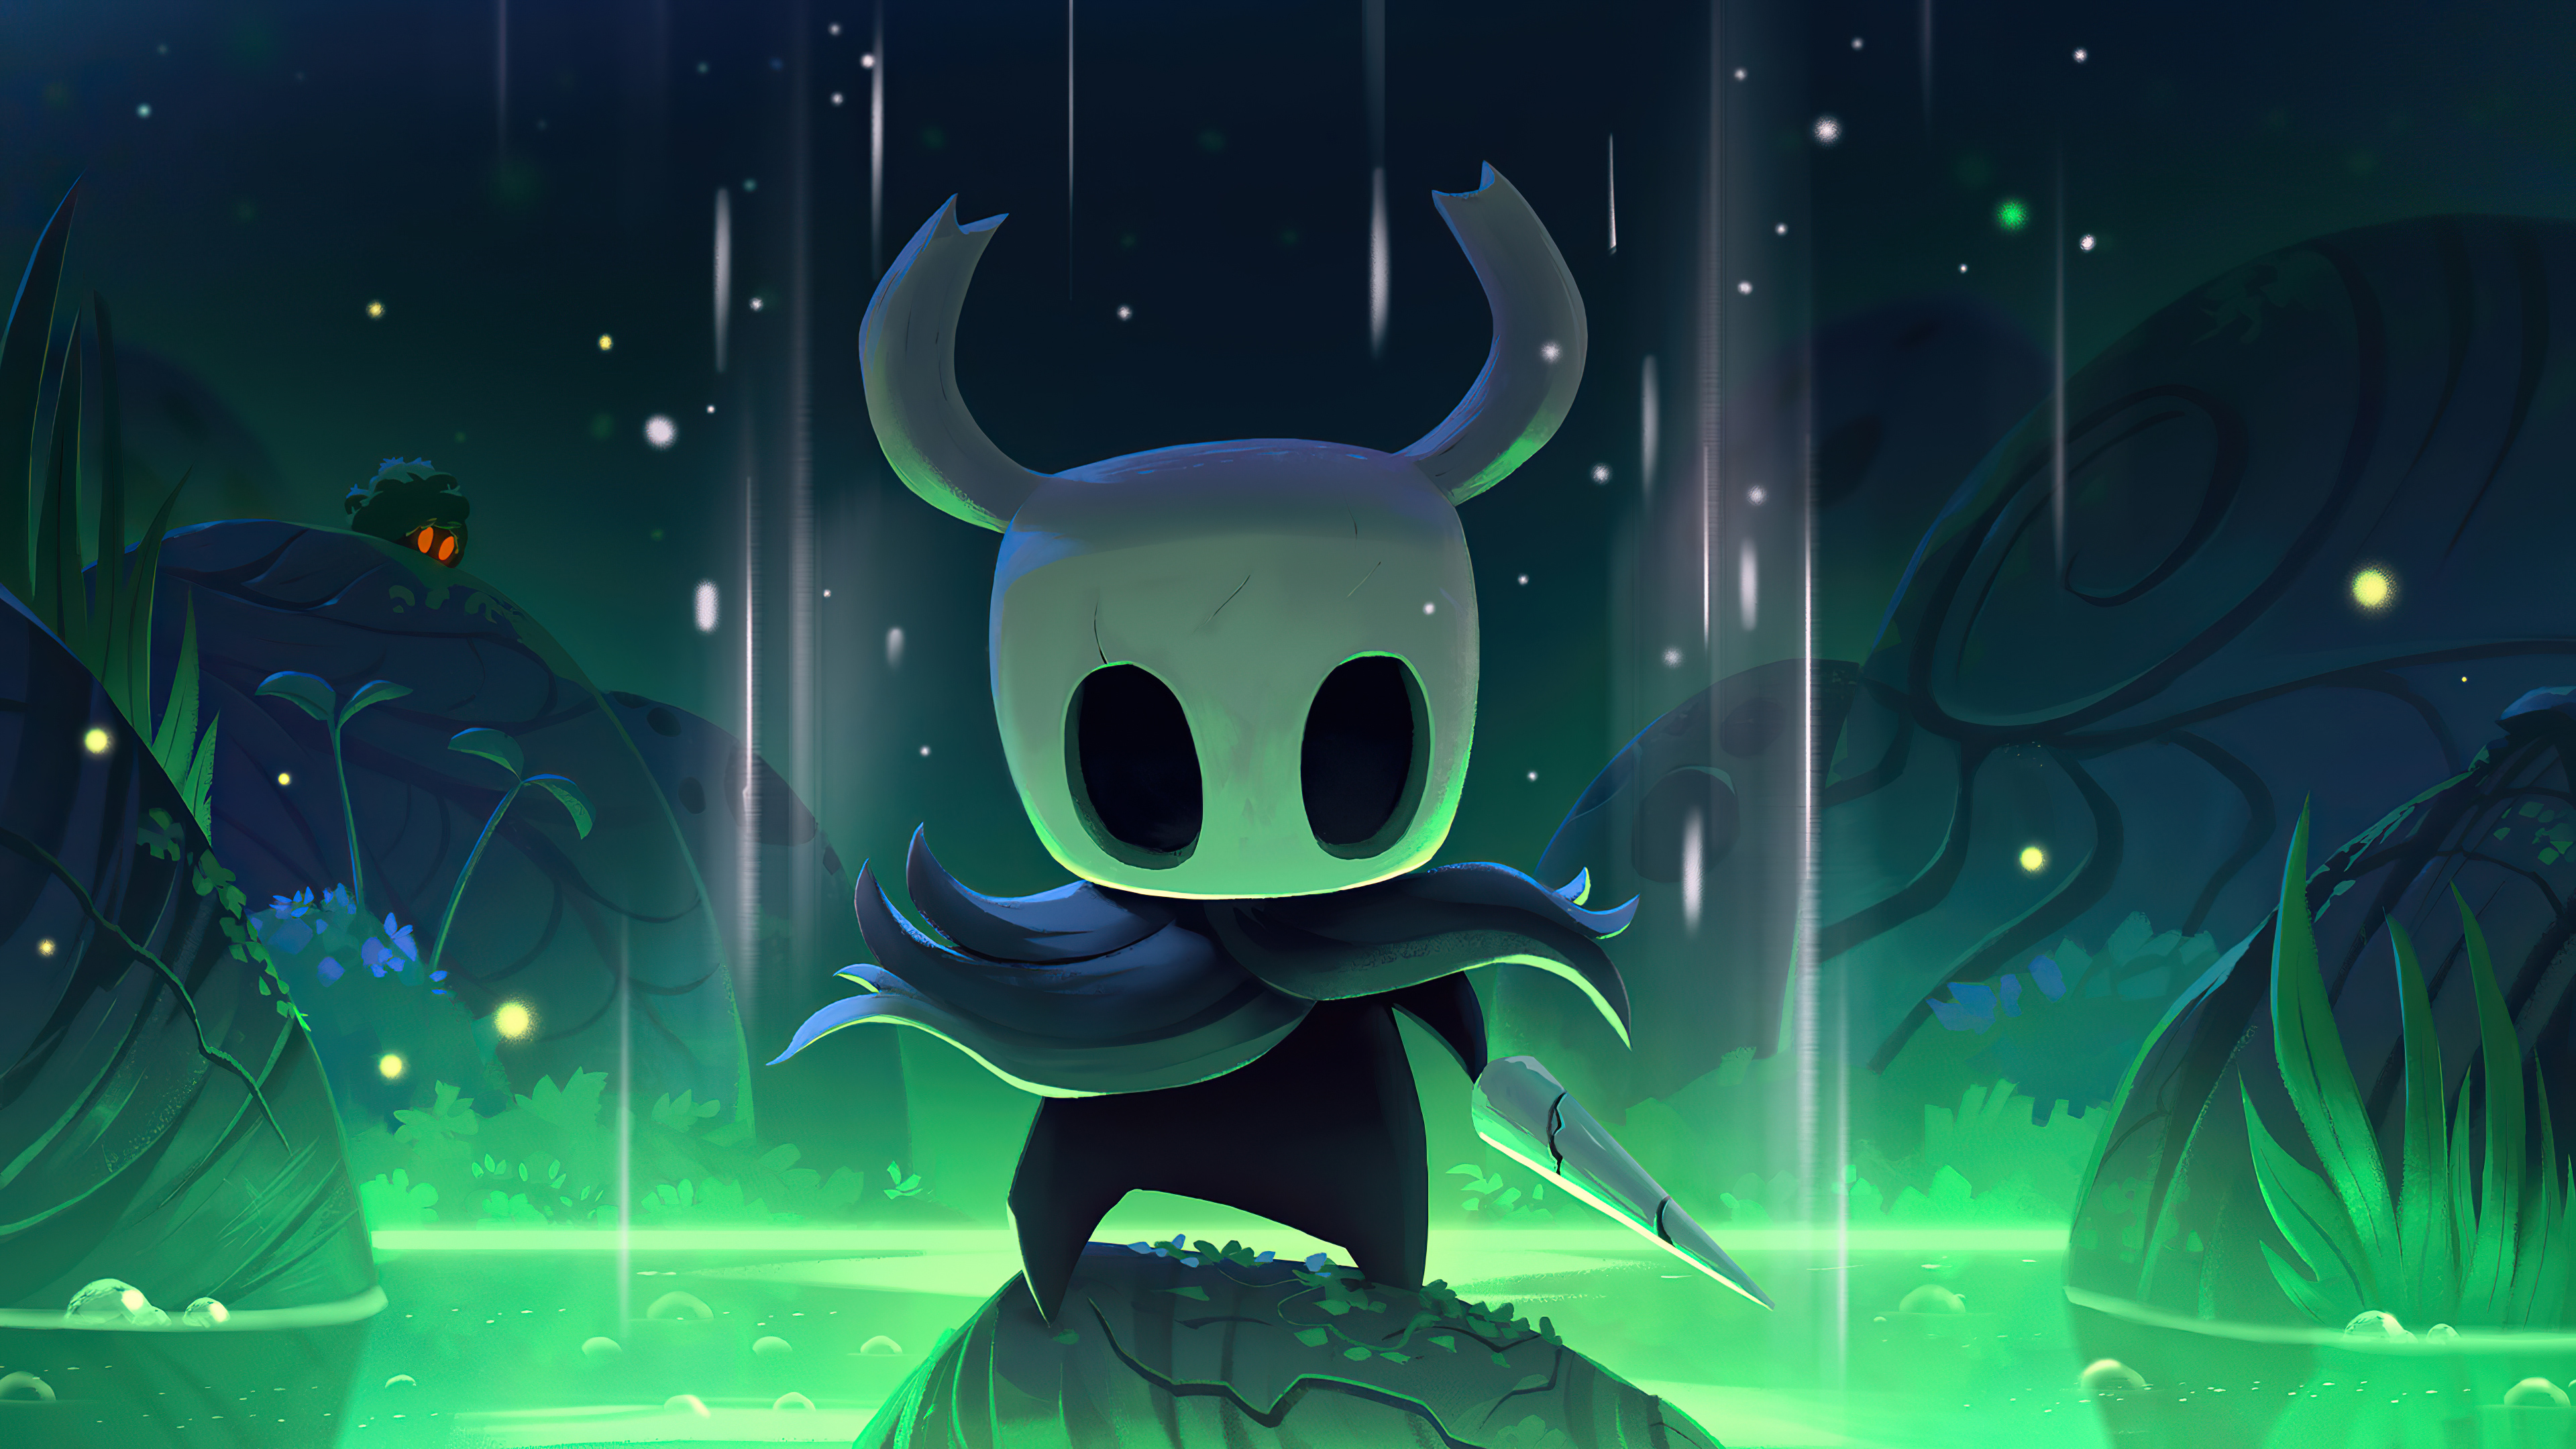 Video Game Hollow Knight 4k Ultra HD Wallpaper by Thibaud Pourplanche